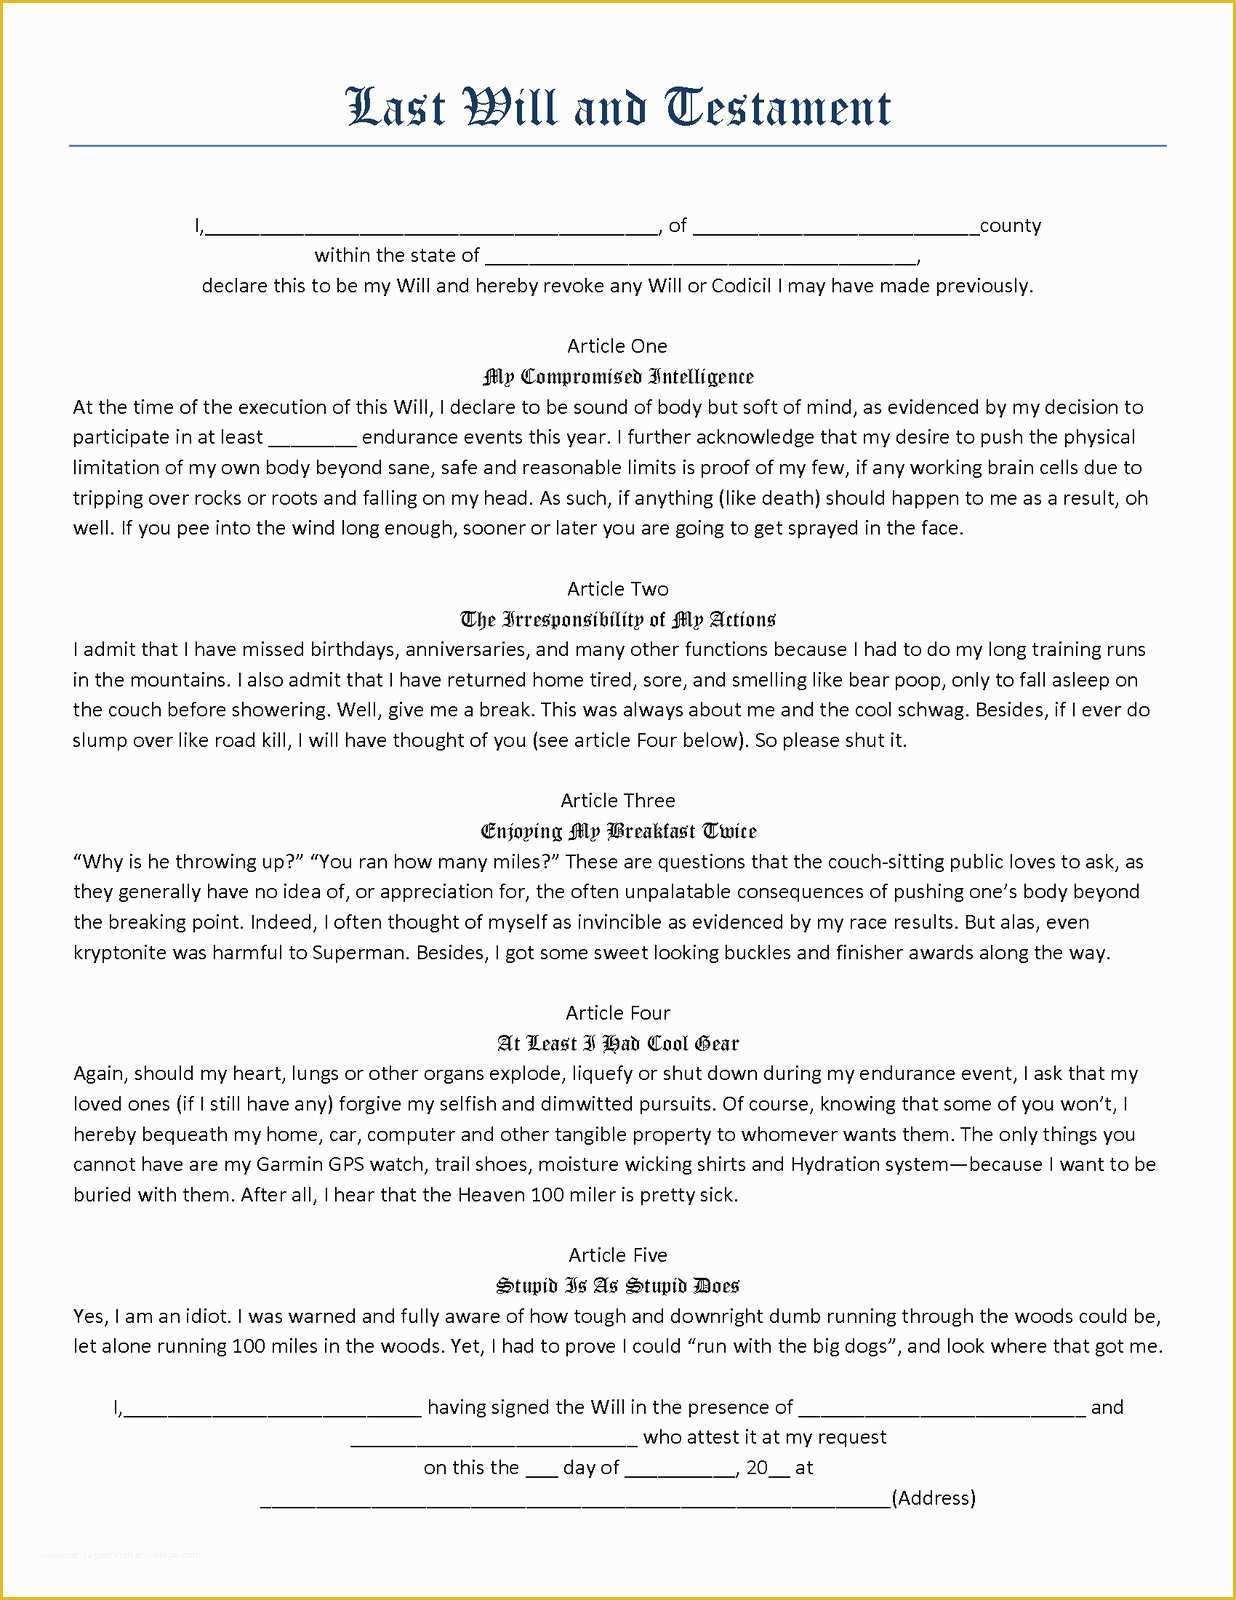 Free Last Will and Testament Template Microsoft Word Of Last Will and Testament Template Beepmunk